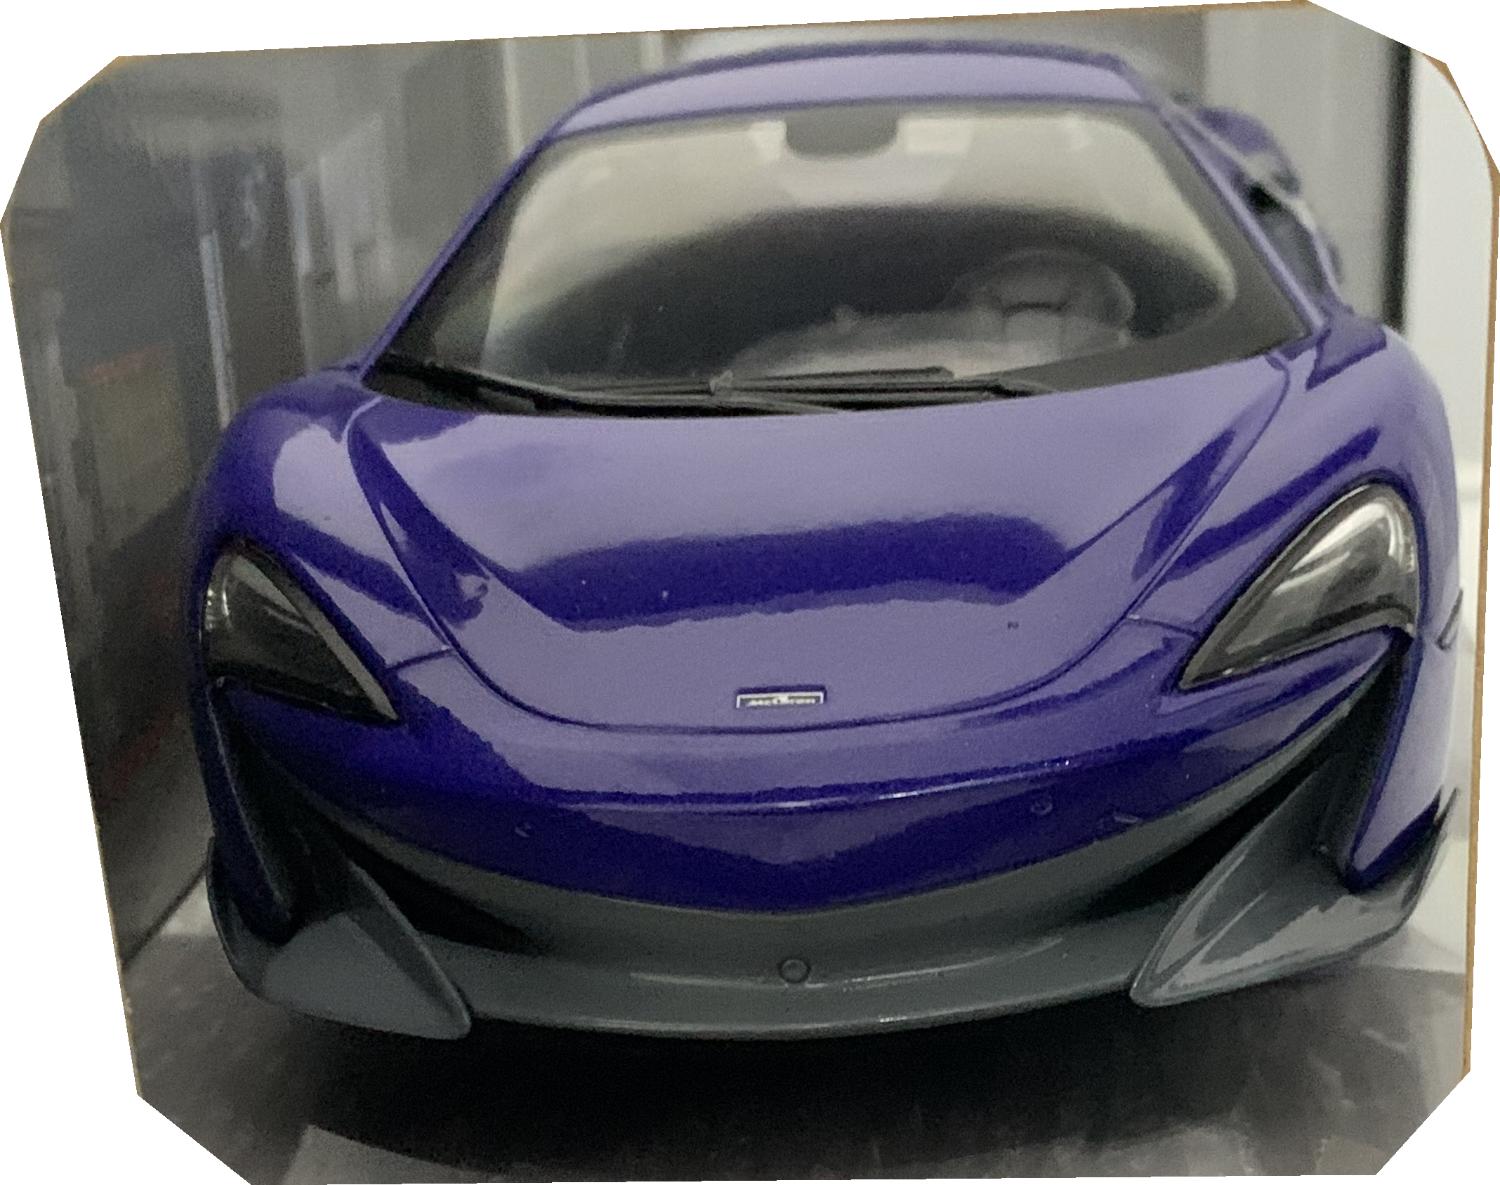 An excellent scale model of the McLaren 600LT with high level of detail throughout, all authentically recreated.  Model mounted on a removable plinth and is presented in a window display box.